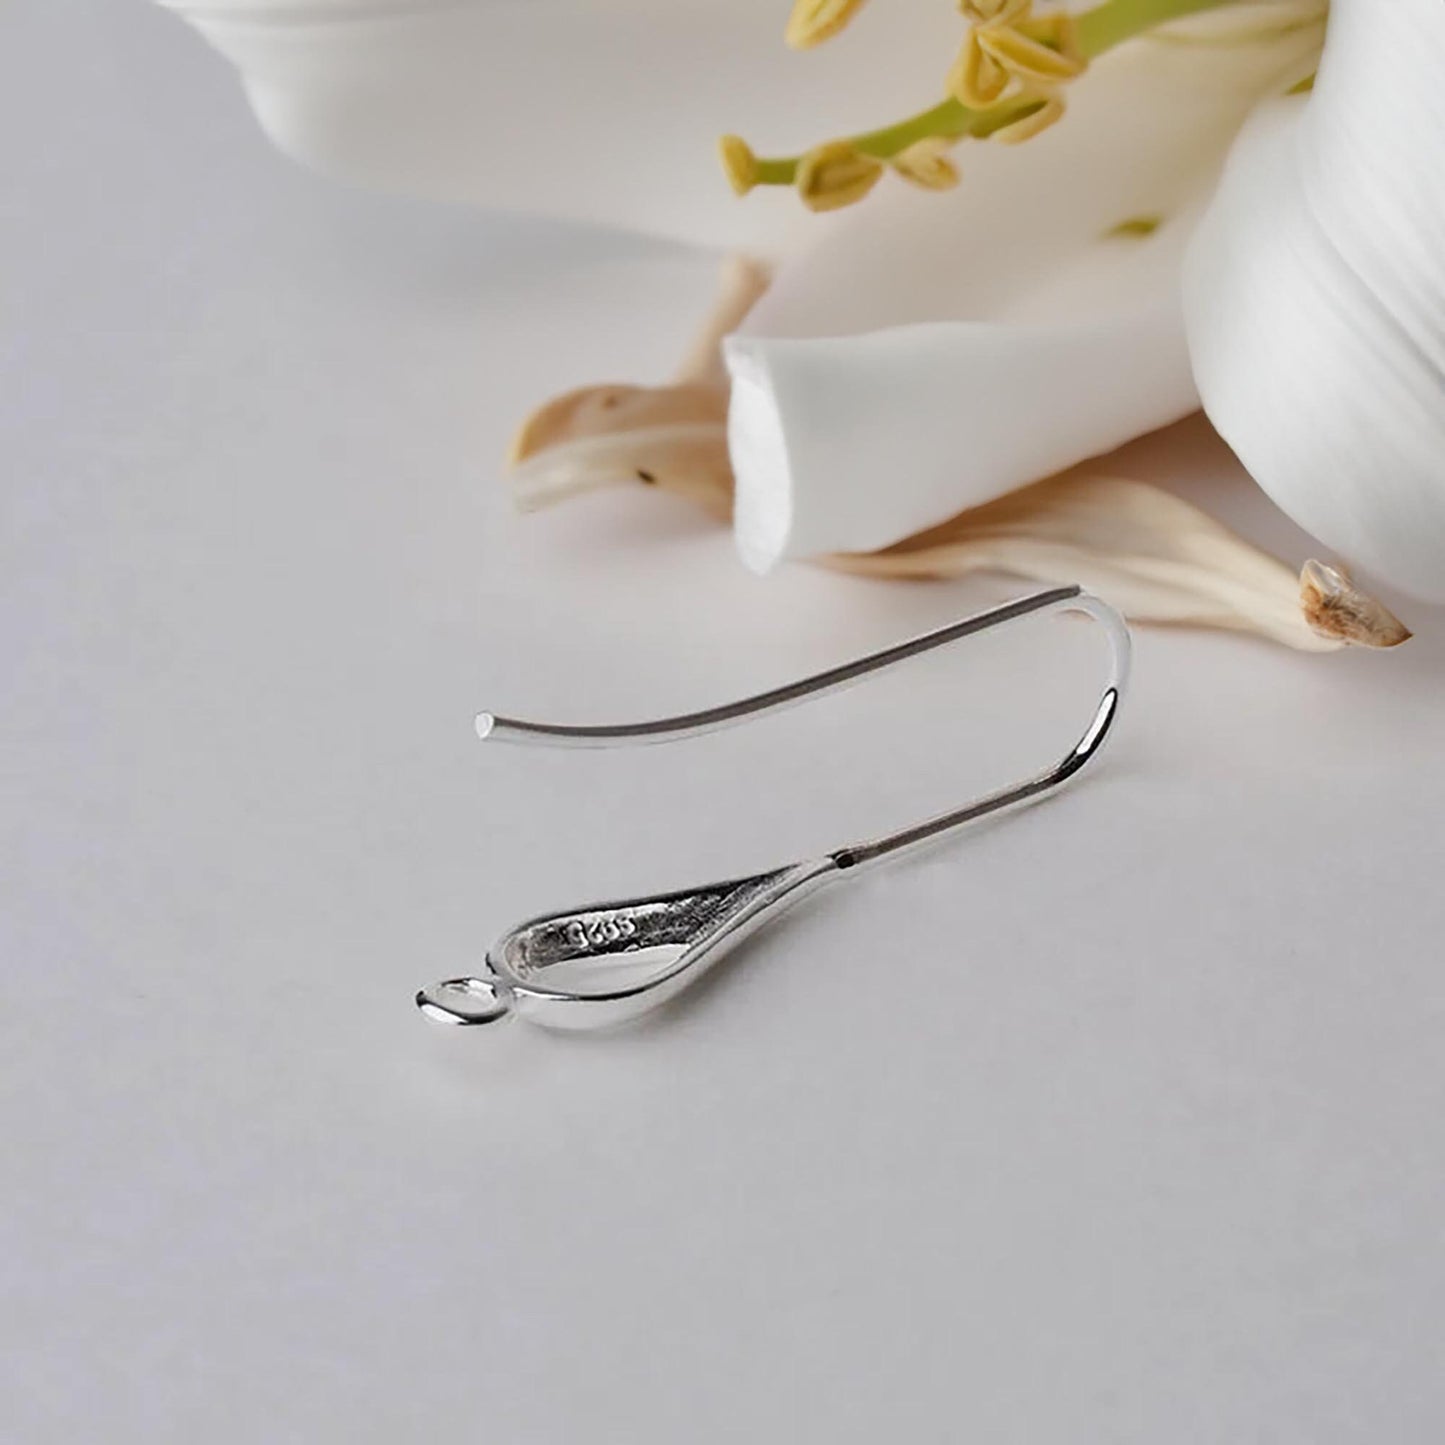 Earring Wires 925 Sterling Silver Earring Hooks Drop Shaped French Hooks Earring Setting DIY Jewelry Making Gift for Her Ear Wires